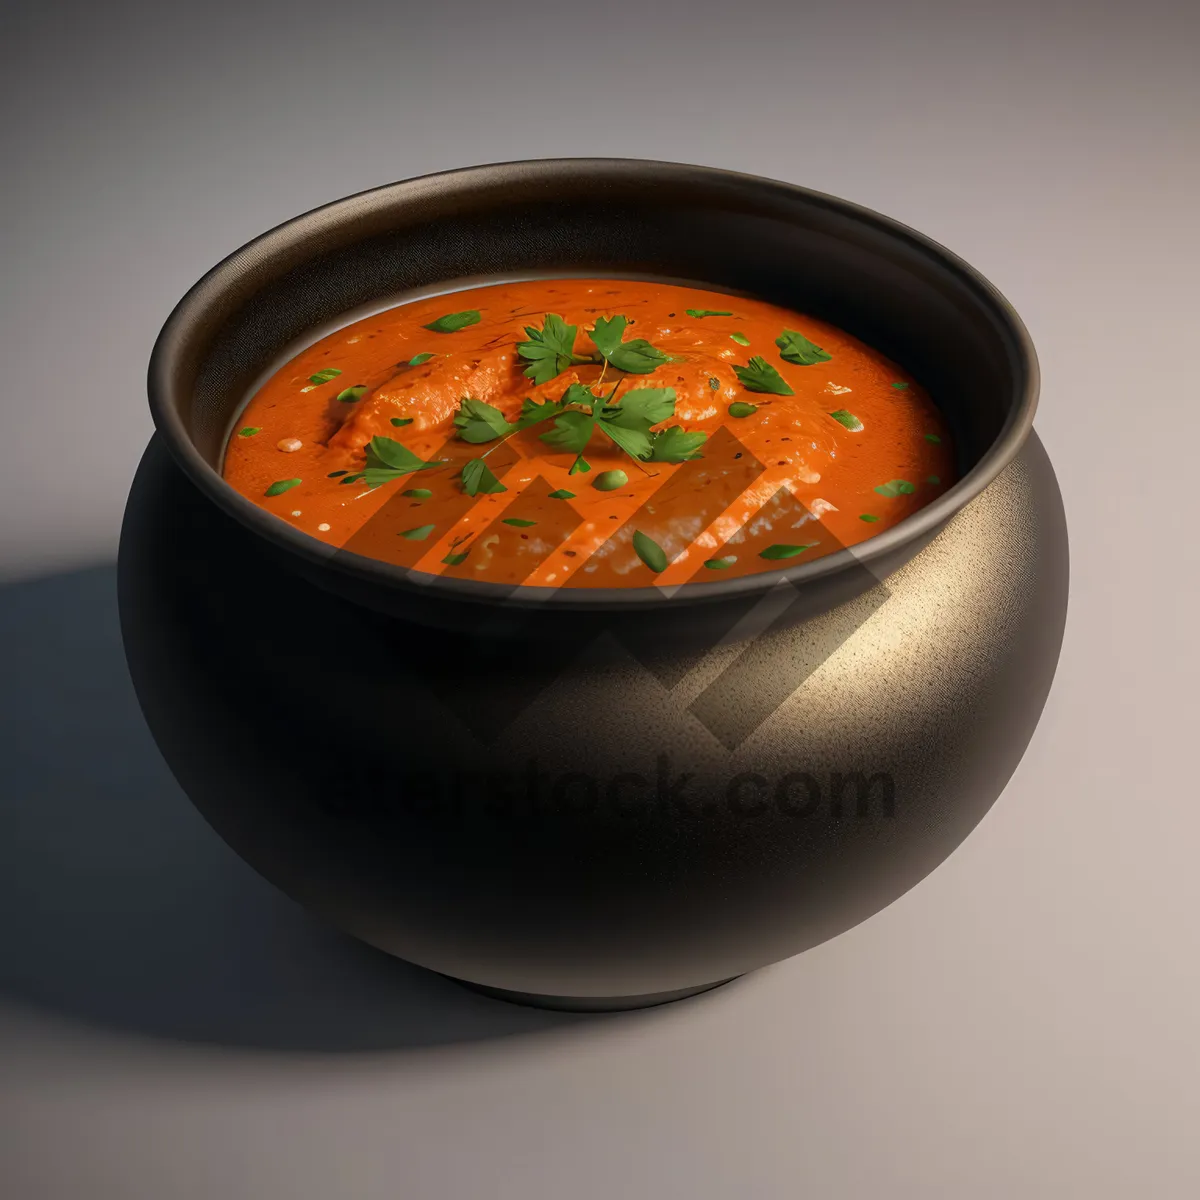 Picture of Hearty Tomato Soup in Bowl - Delicious and Nutritious Dinner